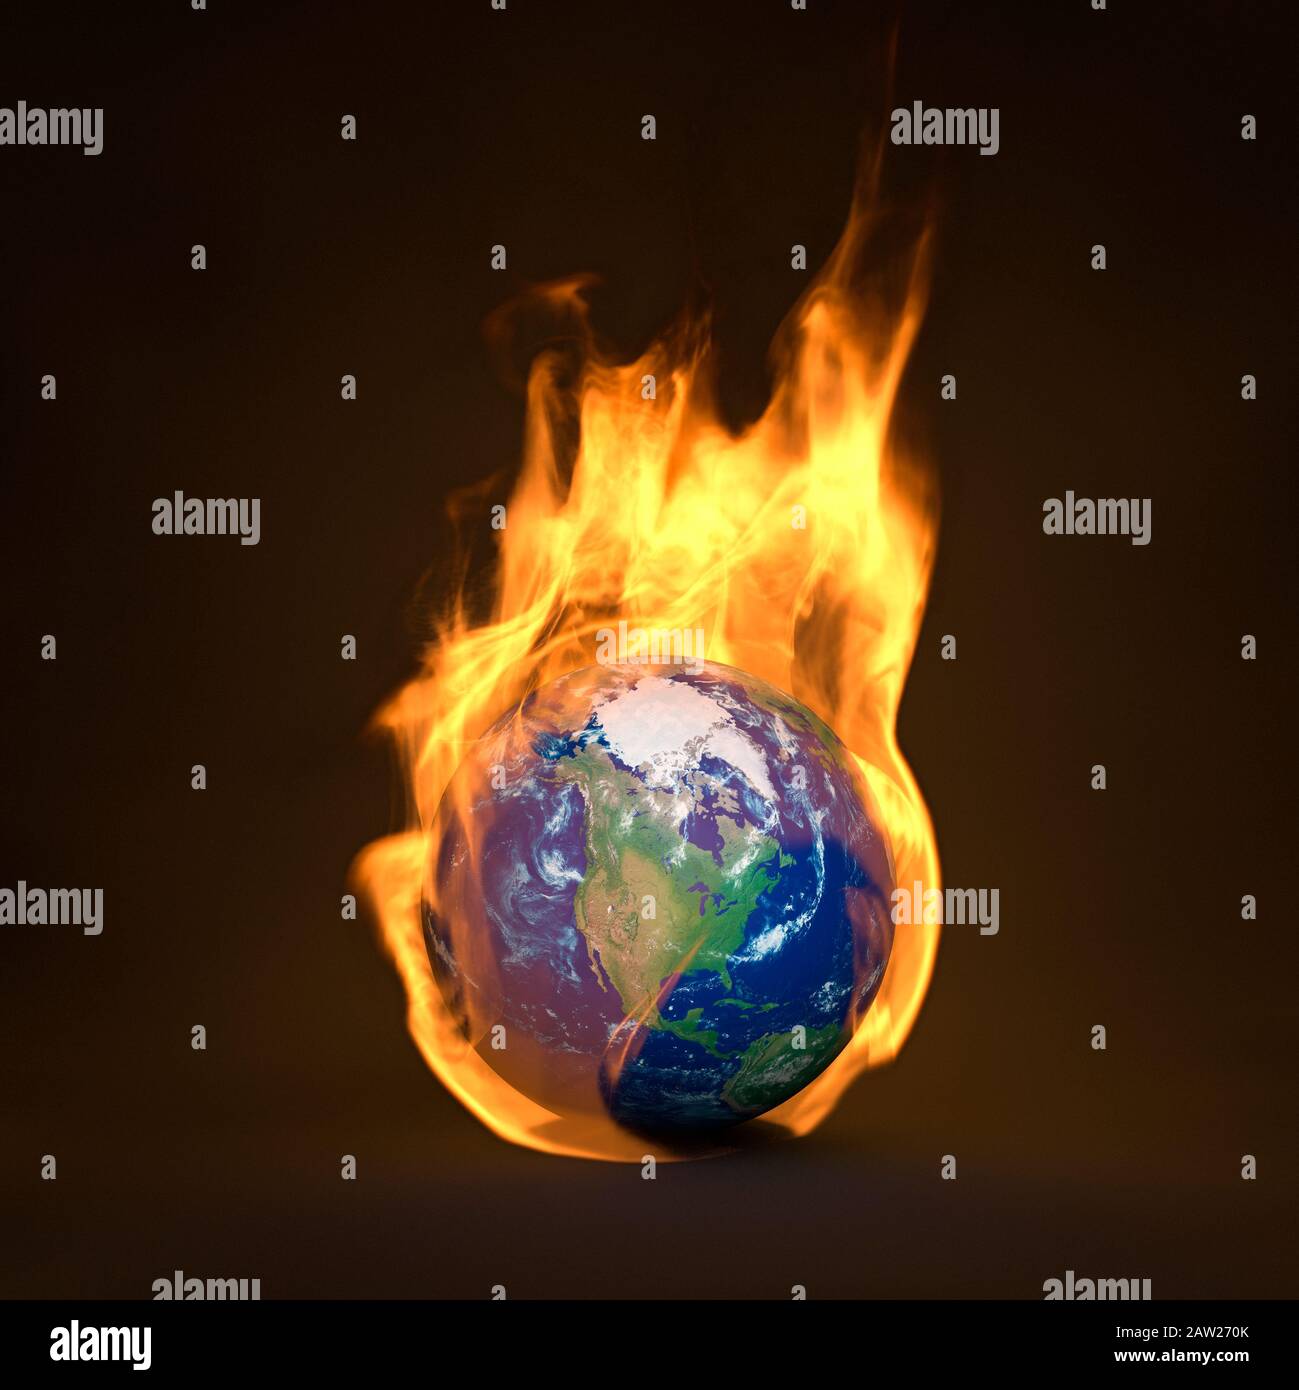 Planet Earth in flames, global warming, climate change concept showing North America Stock Photo